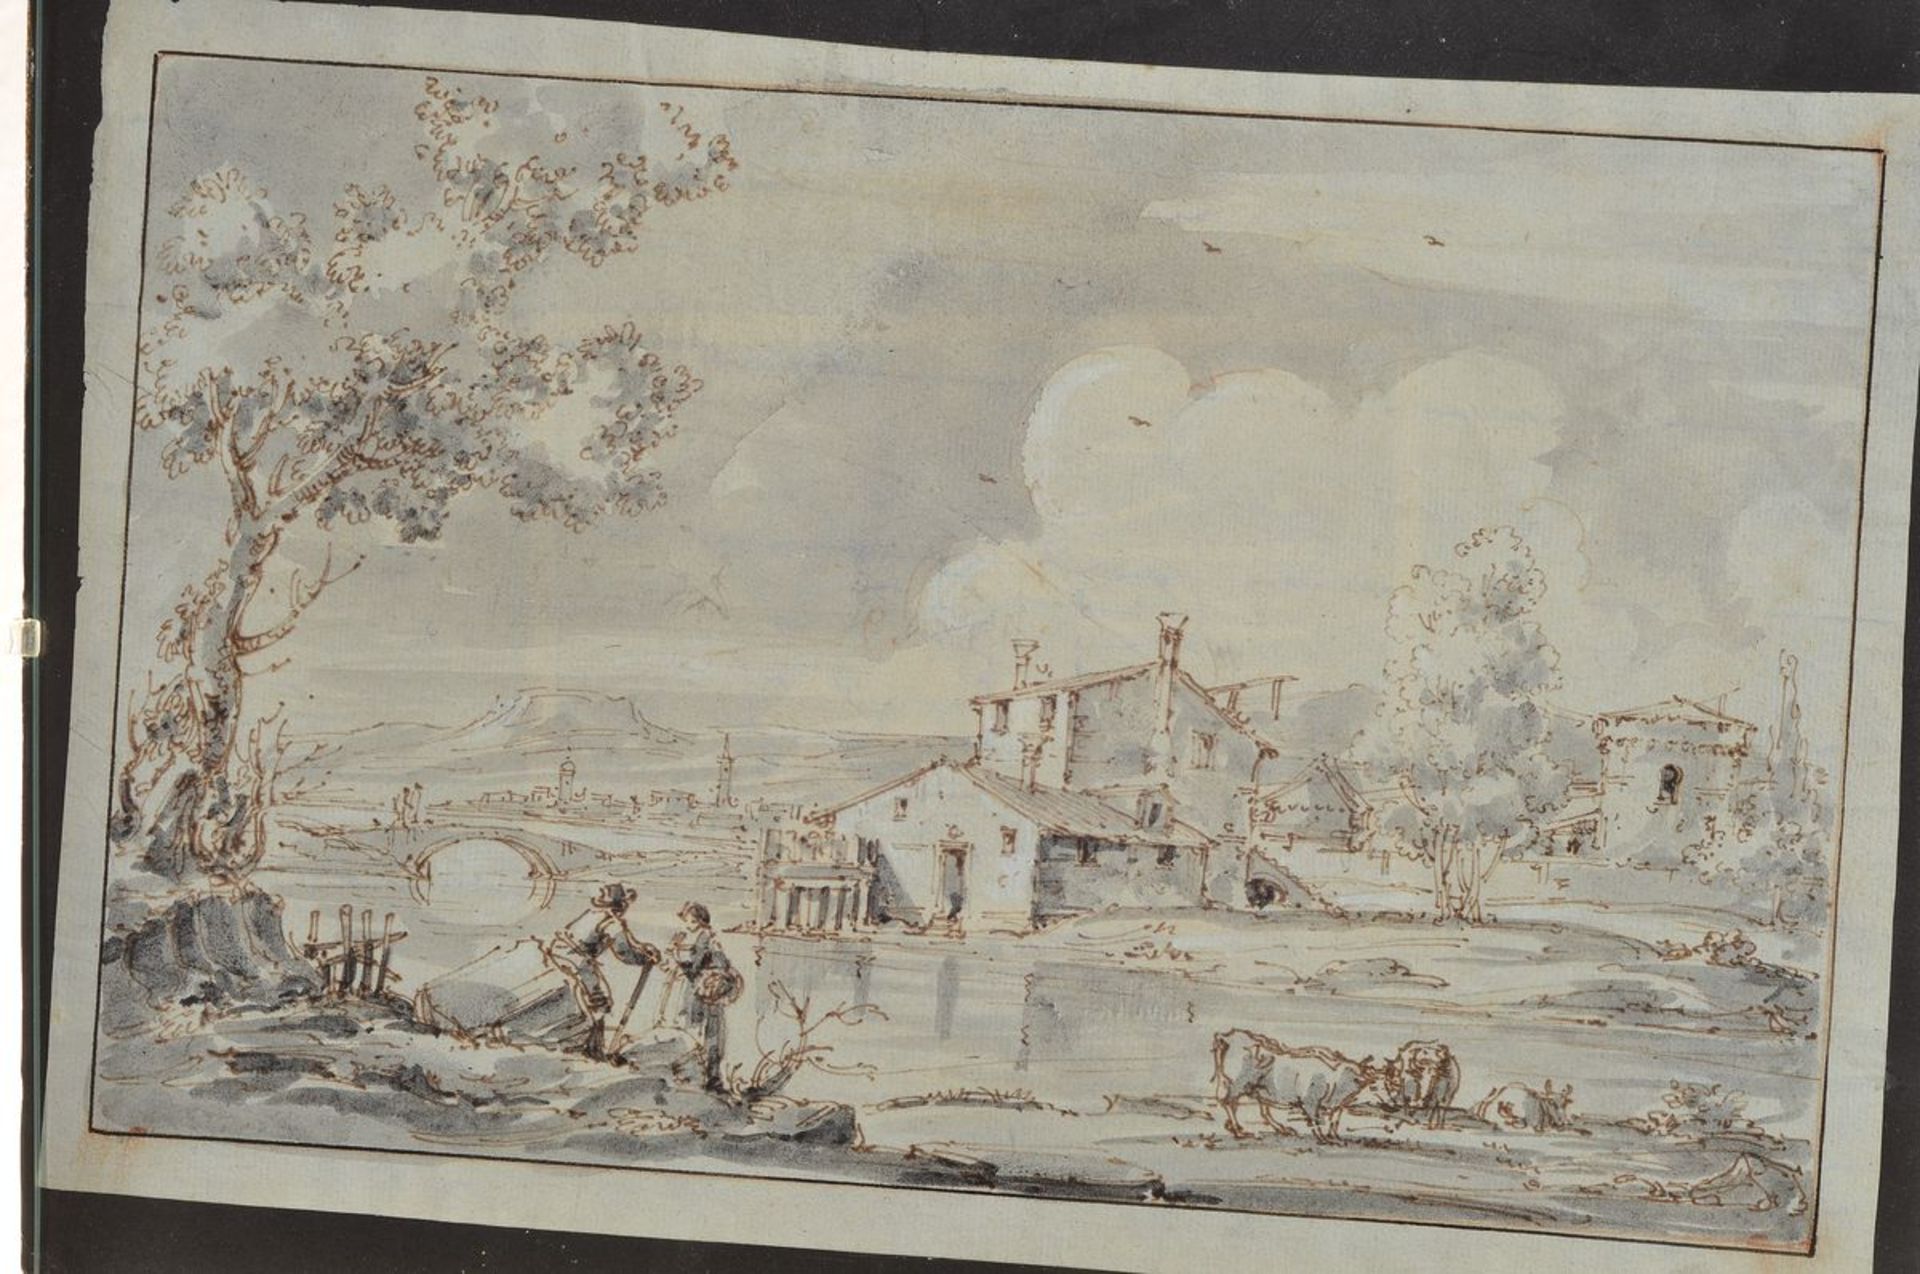 3 wash pen and ink drawings, 18th C., two views from Venice approx. 18x28cm and 20x29cm,farmstead on - Image 5 of 6